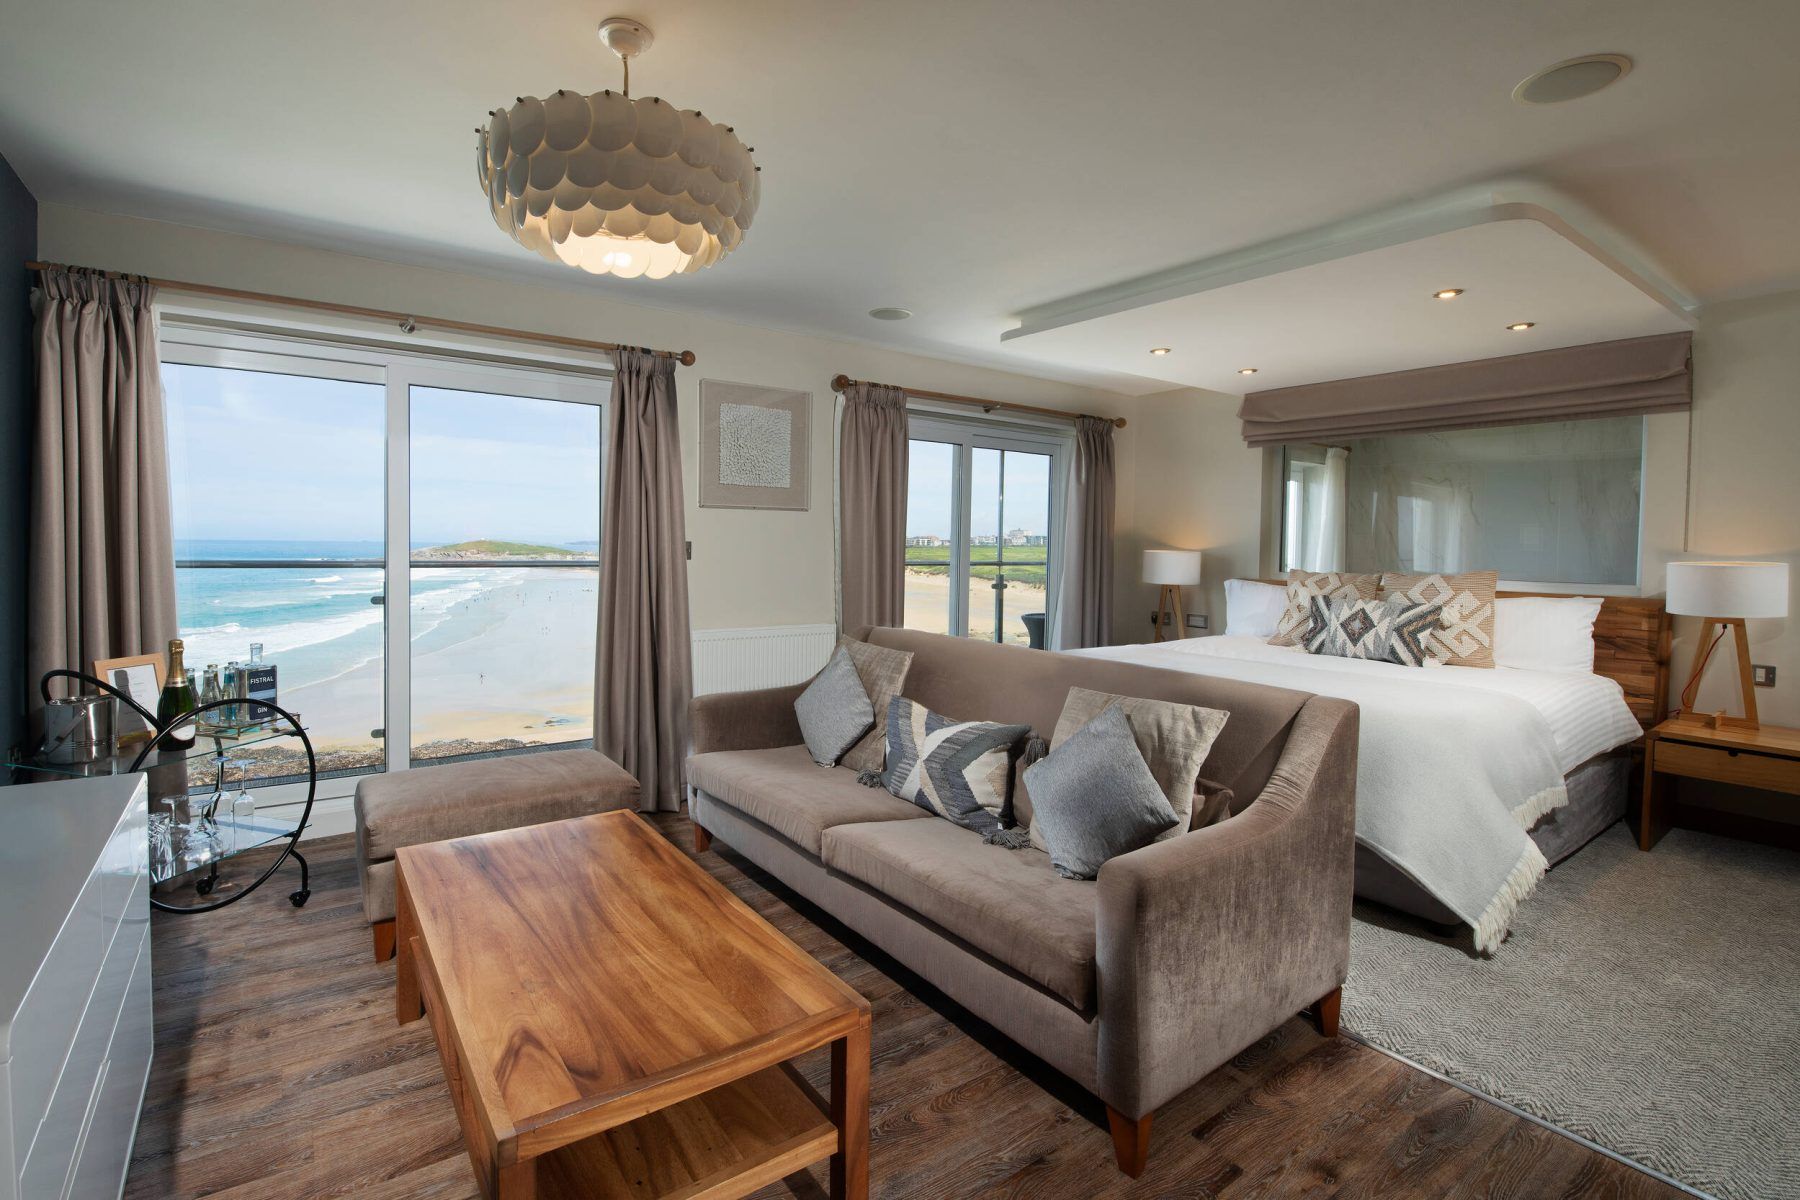 Suite at Fistral beach